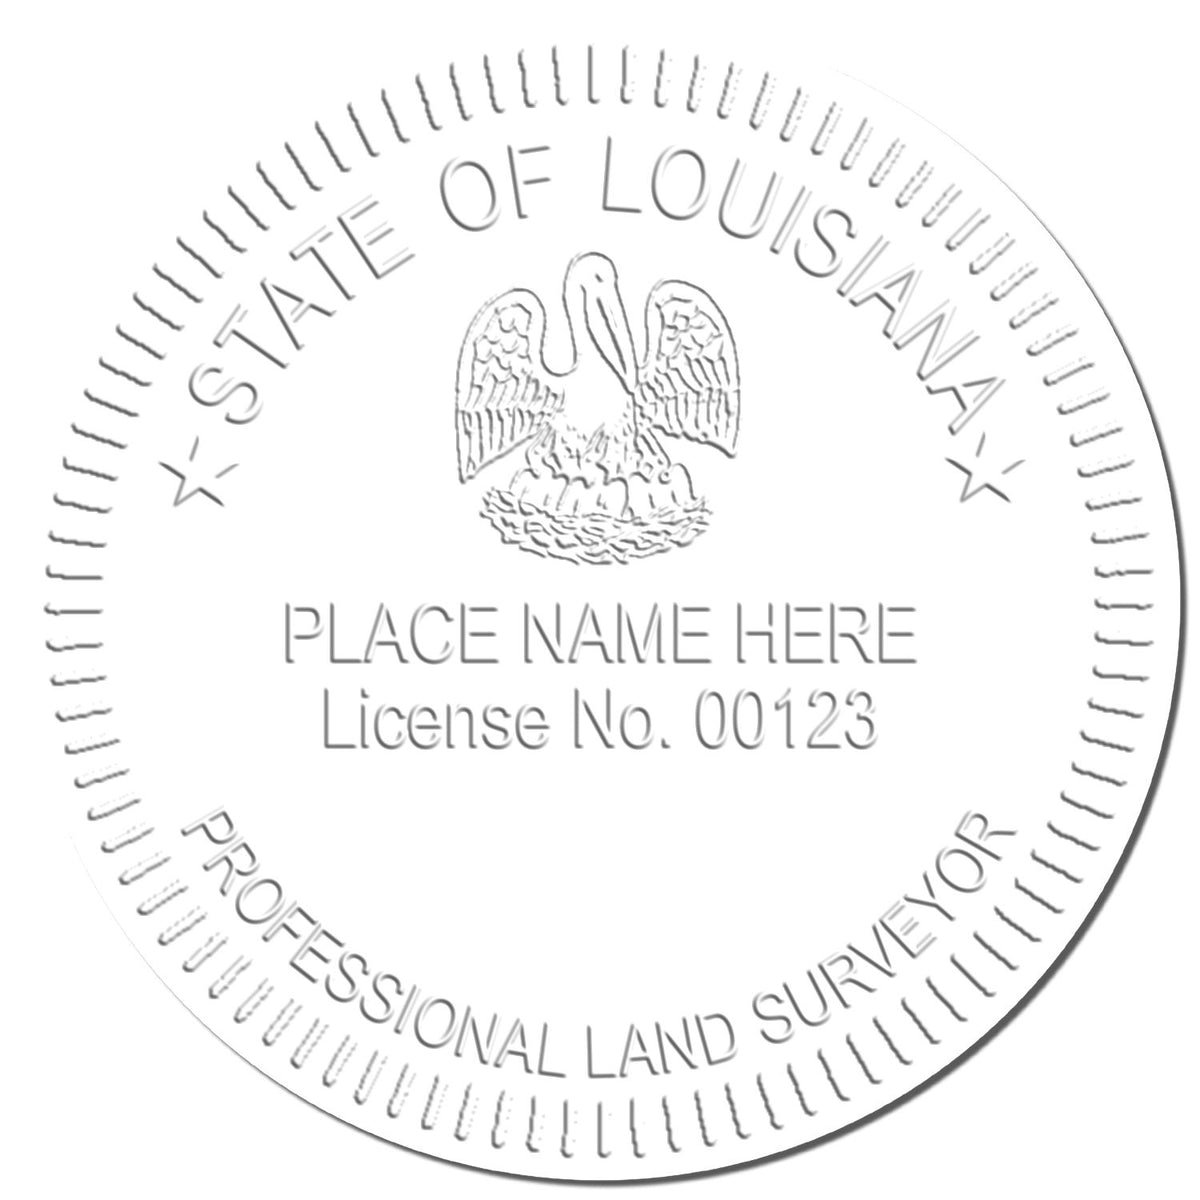 This paper is stamped with a sample imprint of the Louisiana Desk Surveyor Seal Embosser, signifying its quality and reliability.